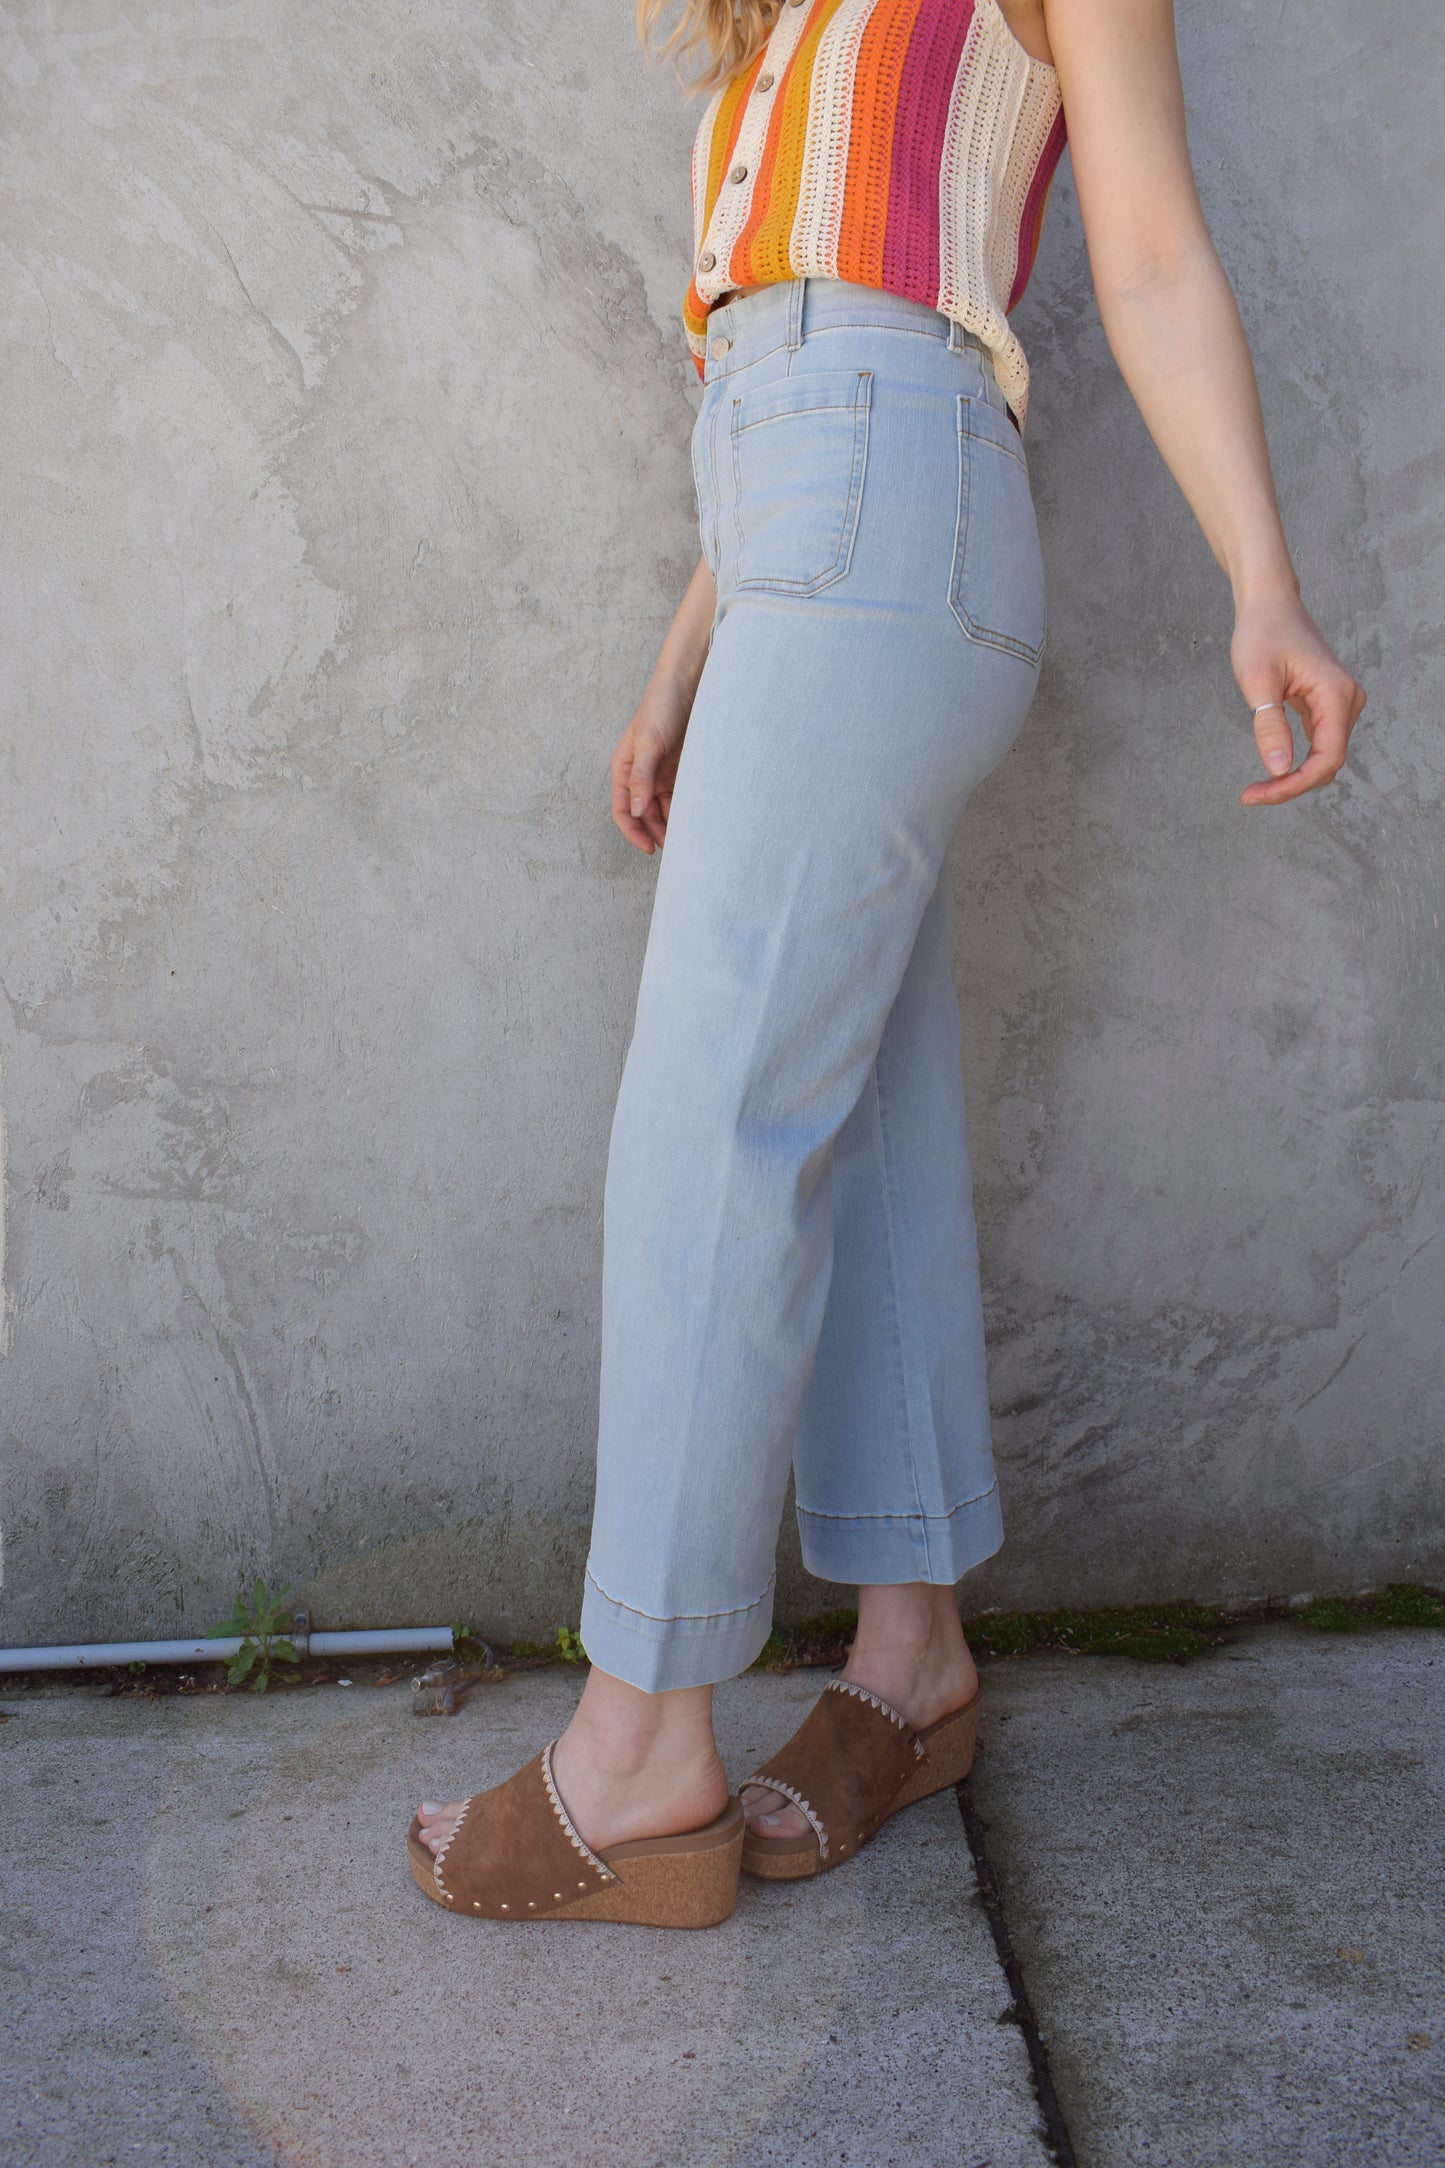 wide leg slightly cropped light wash jeans with front patch pockets. back pockets. zip and button enclosure. no holes. stretch denim. high waisted. seam detailing on back waistband area.